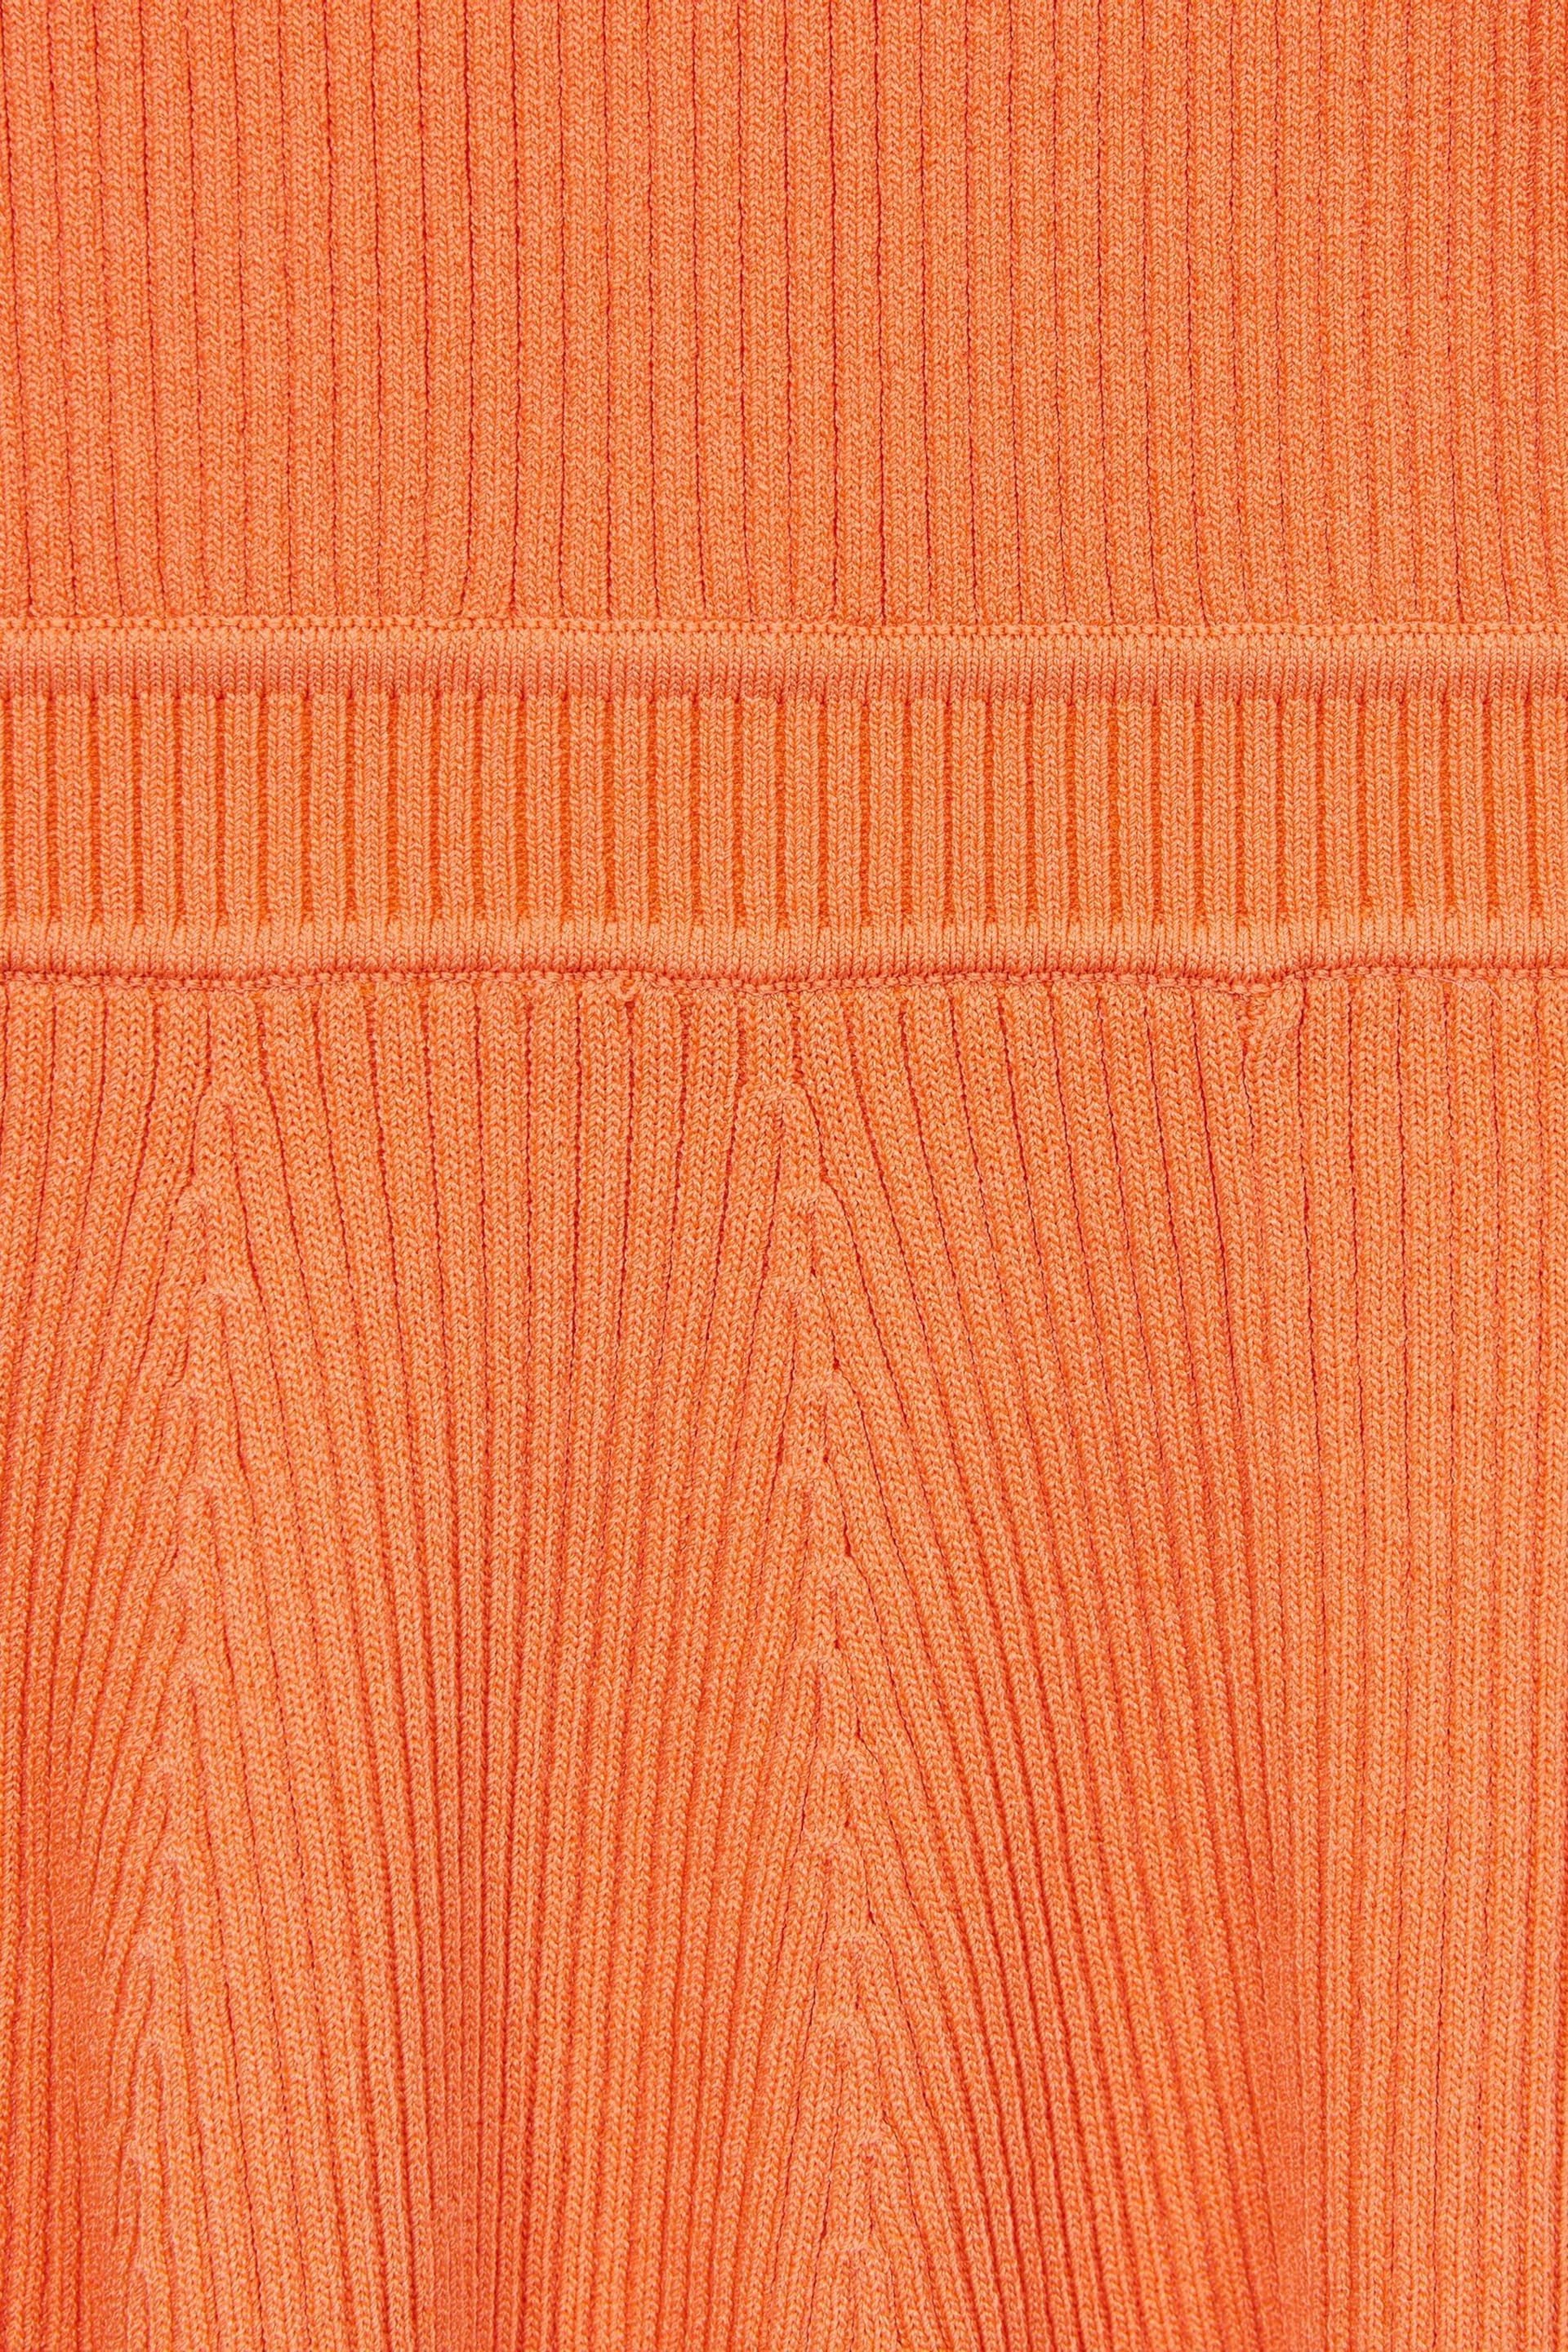 Reiss Orange Clare Junior Knitted Fit and Flare Dress - Image 7 of 7